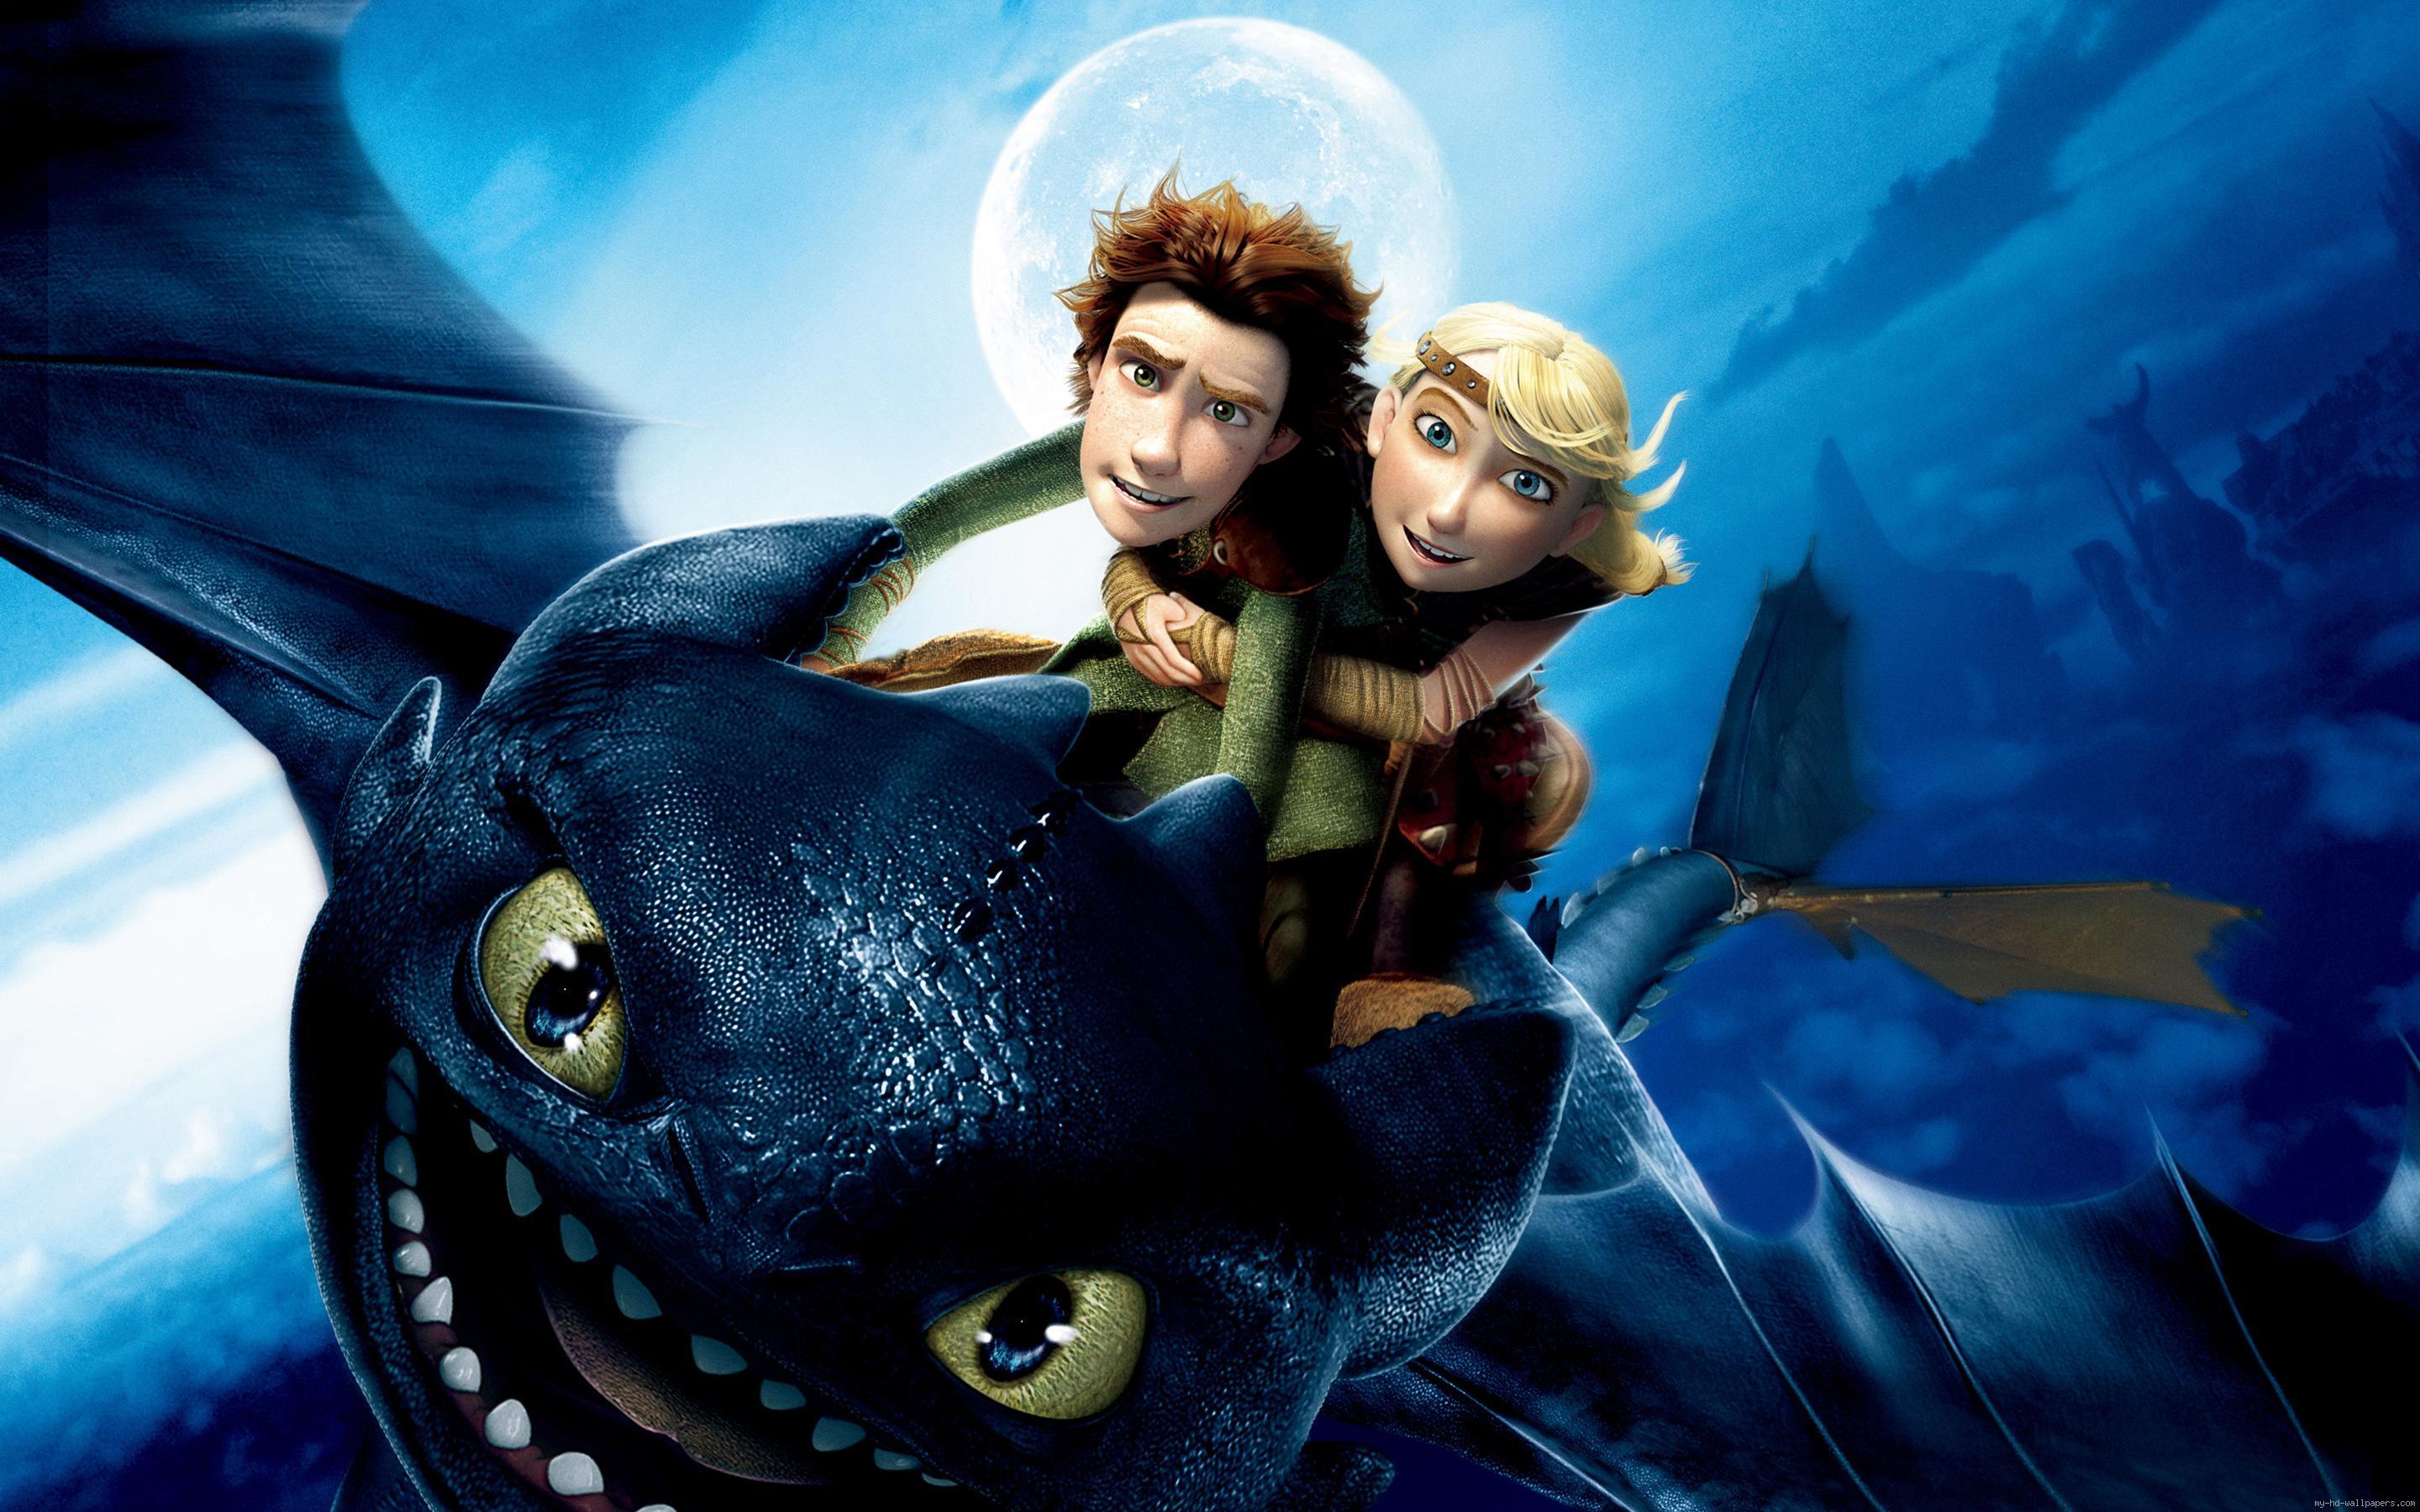 How to train your dragon Hiccup Toothless and Astrid wallpaper